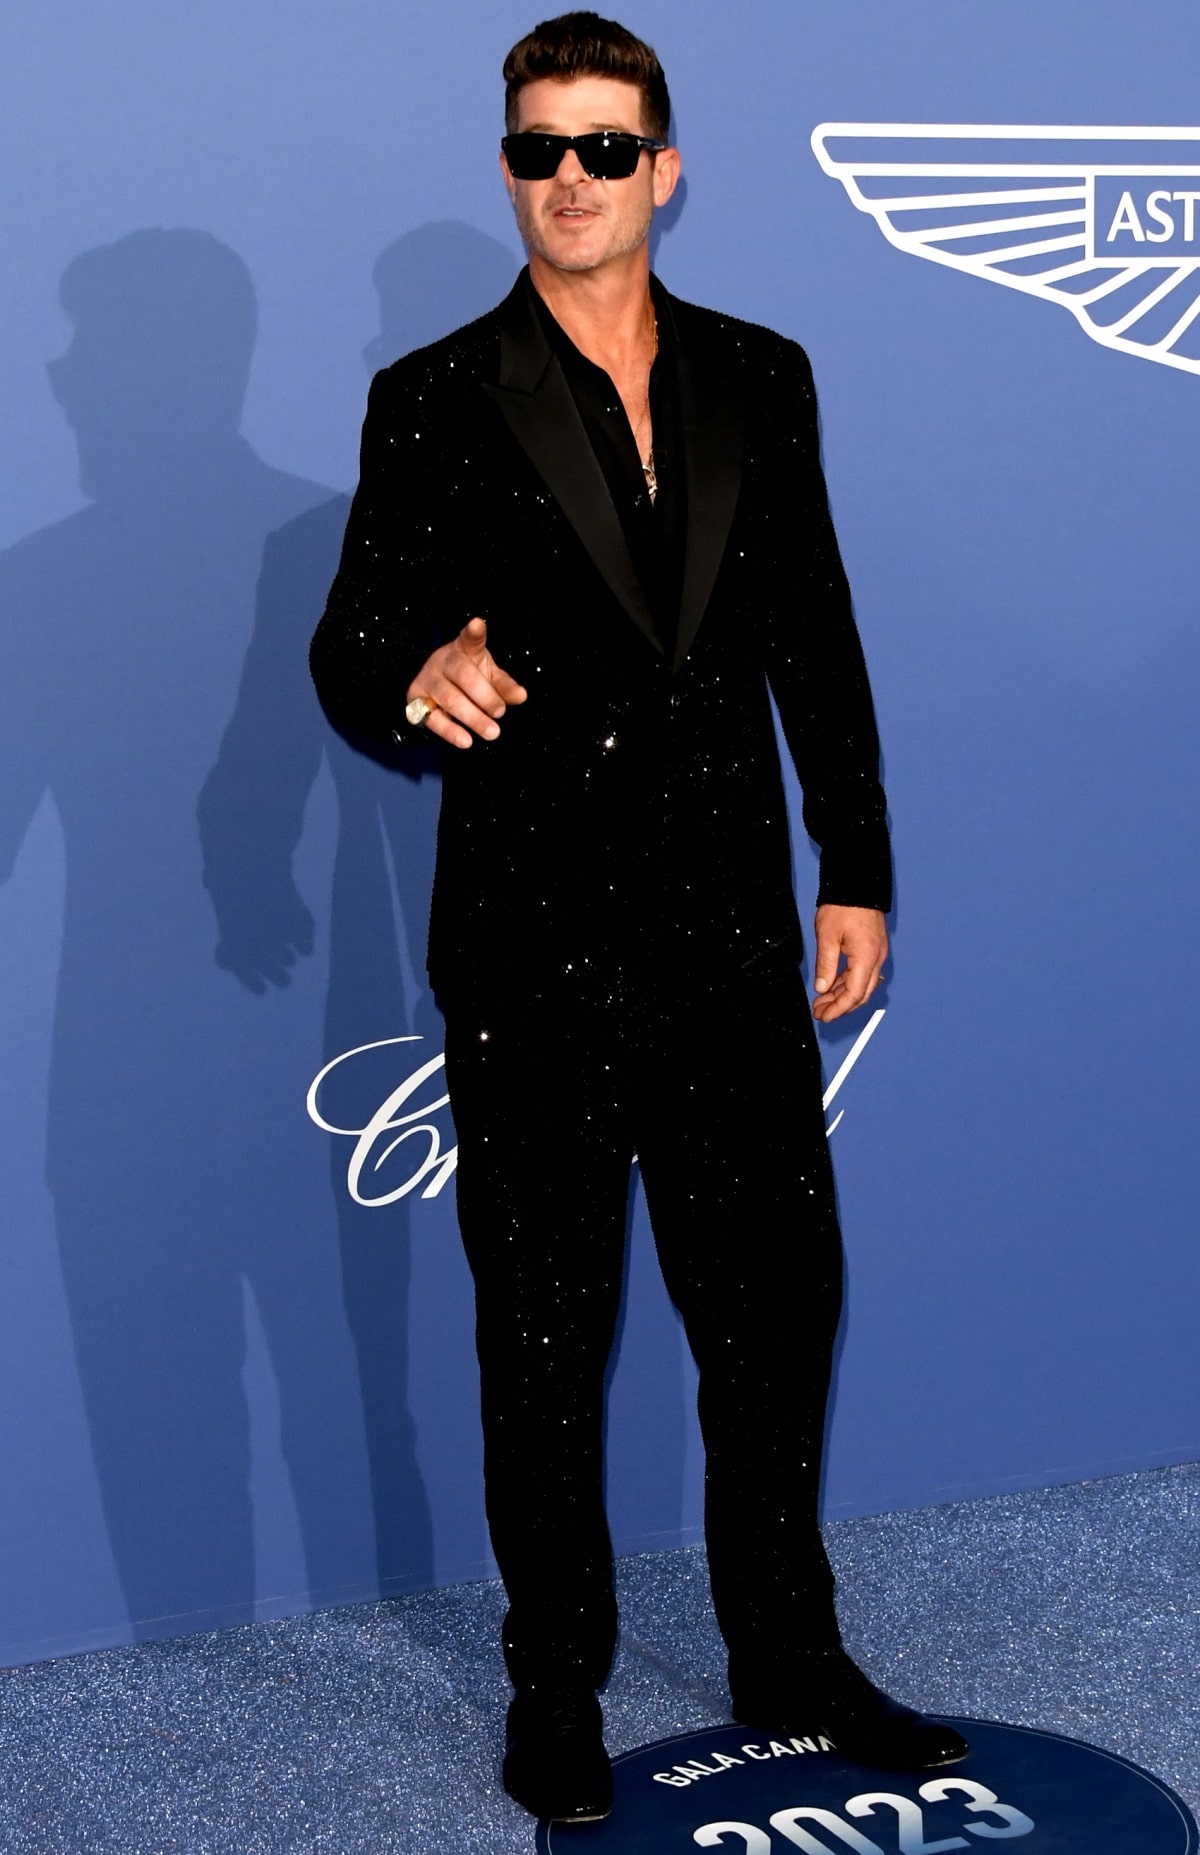 Robin Thicke wearing an all-black ensemble with sleek dress shoes and striking accessories